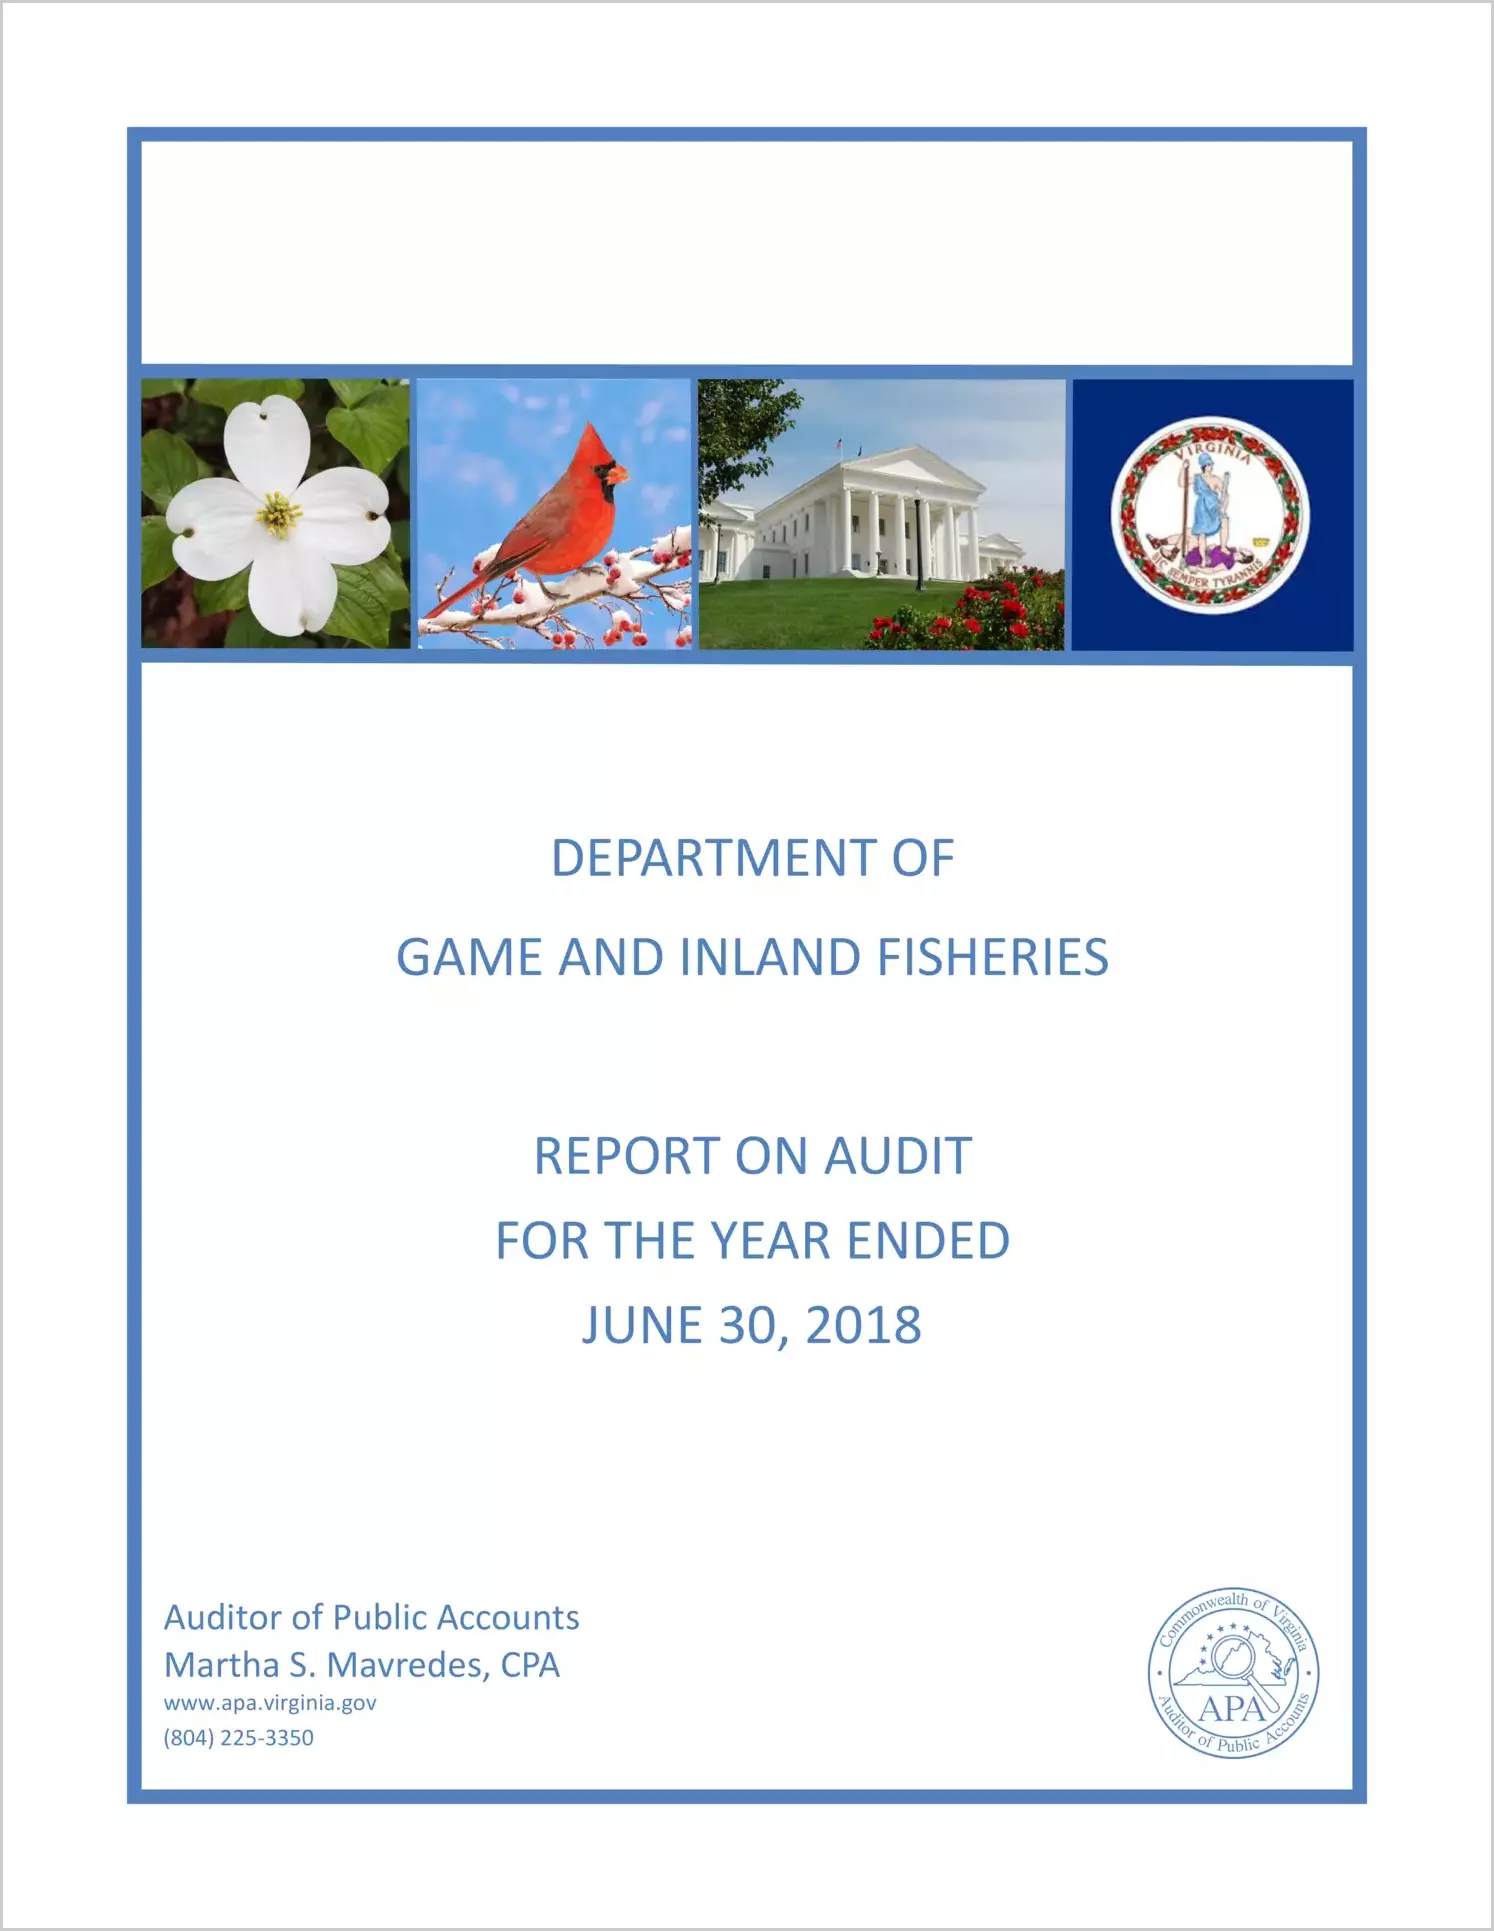 Department of Game and Inland Fisheries for the year ended June 30, 2018